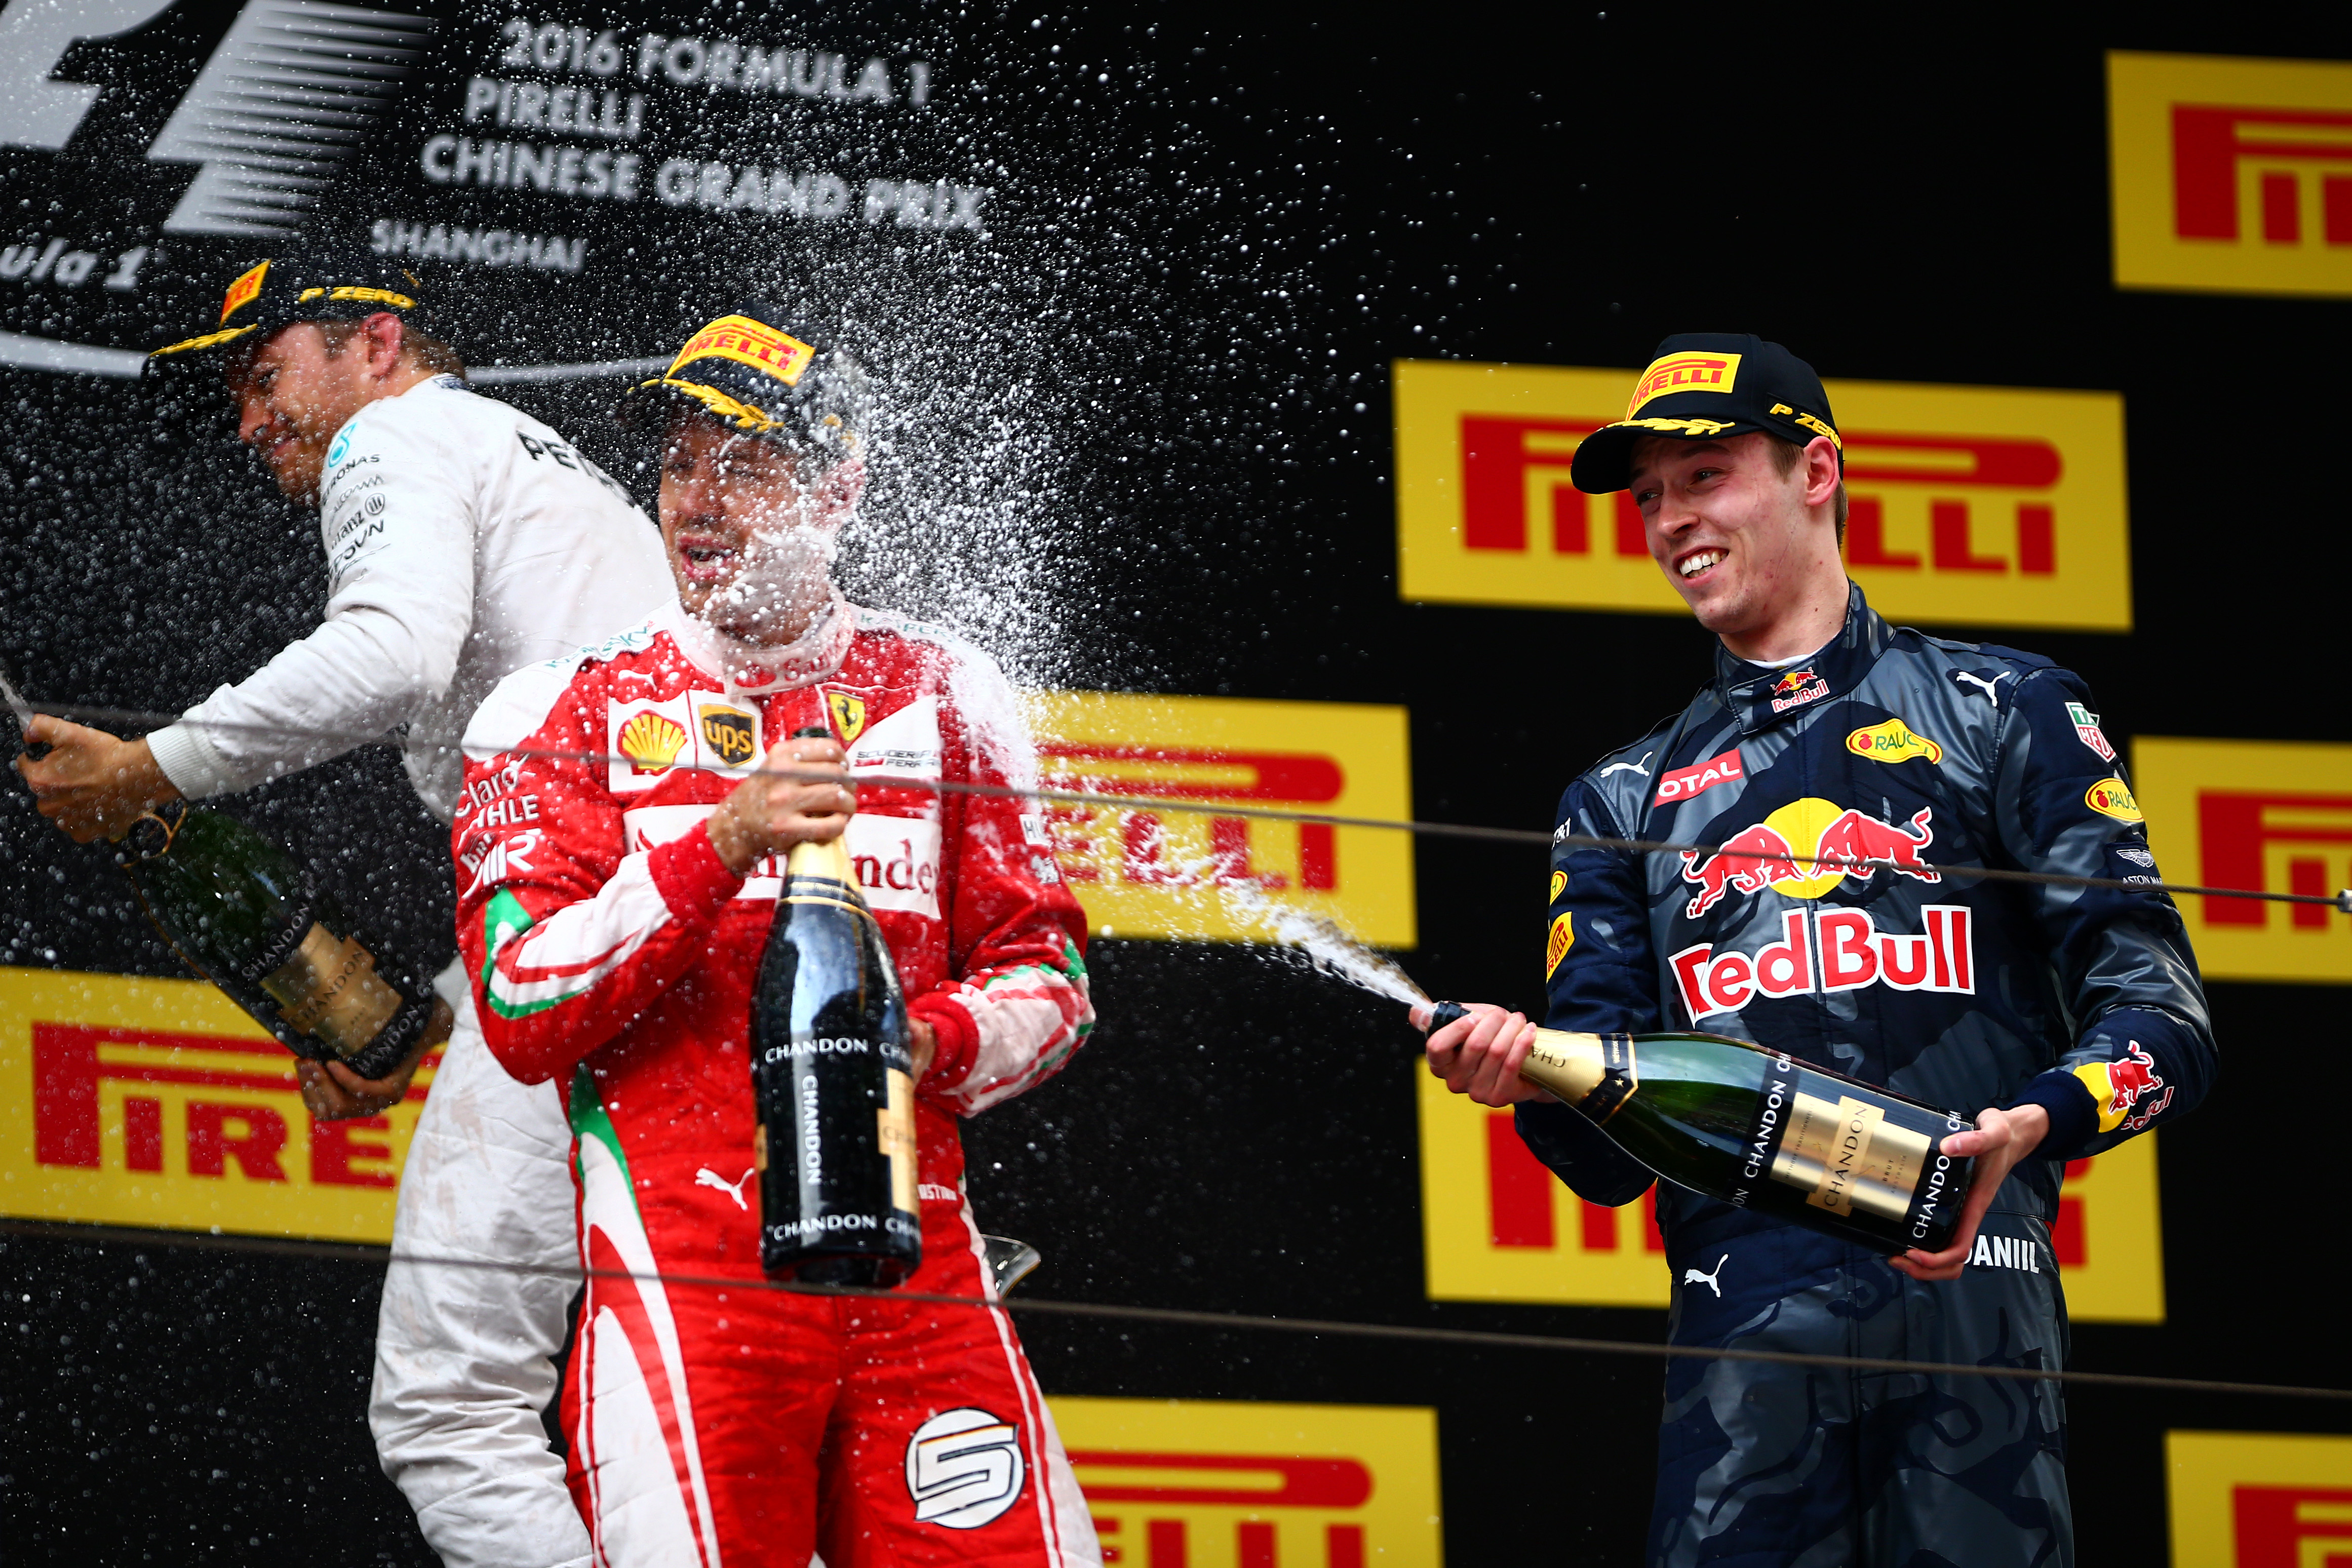 Kvyat and Vettel let their hair down after with a champagne shower as they became friends again